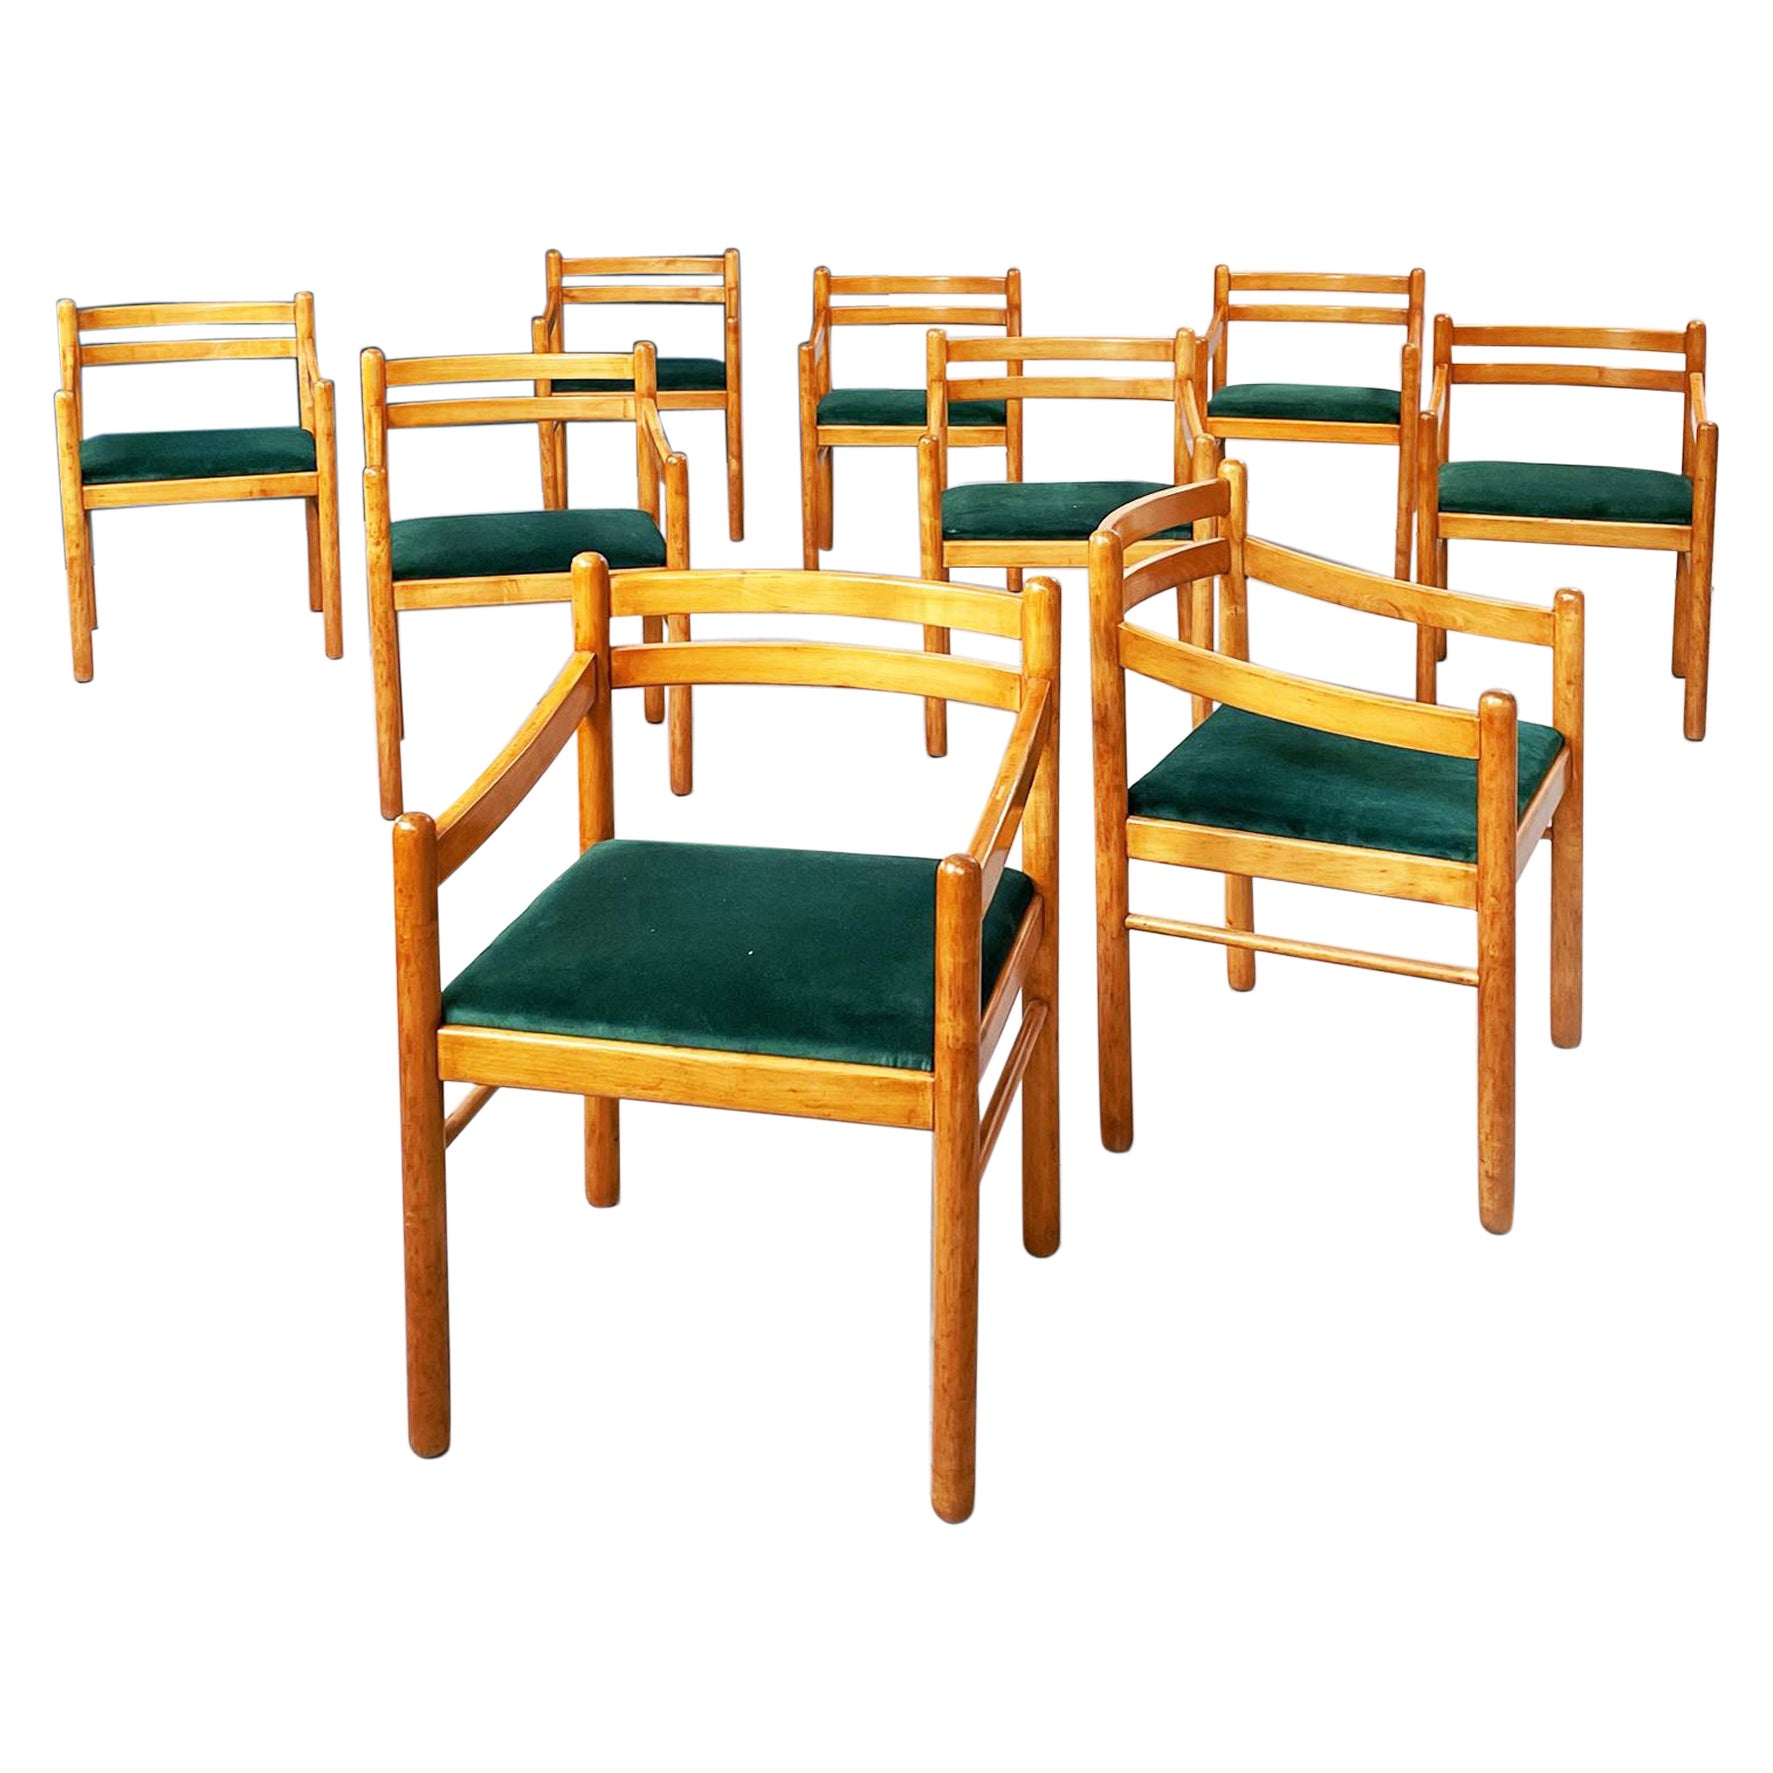 Italian Mid-Century Modern Wooden Chairs with Forest Green Velvet, 1960s